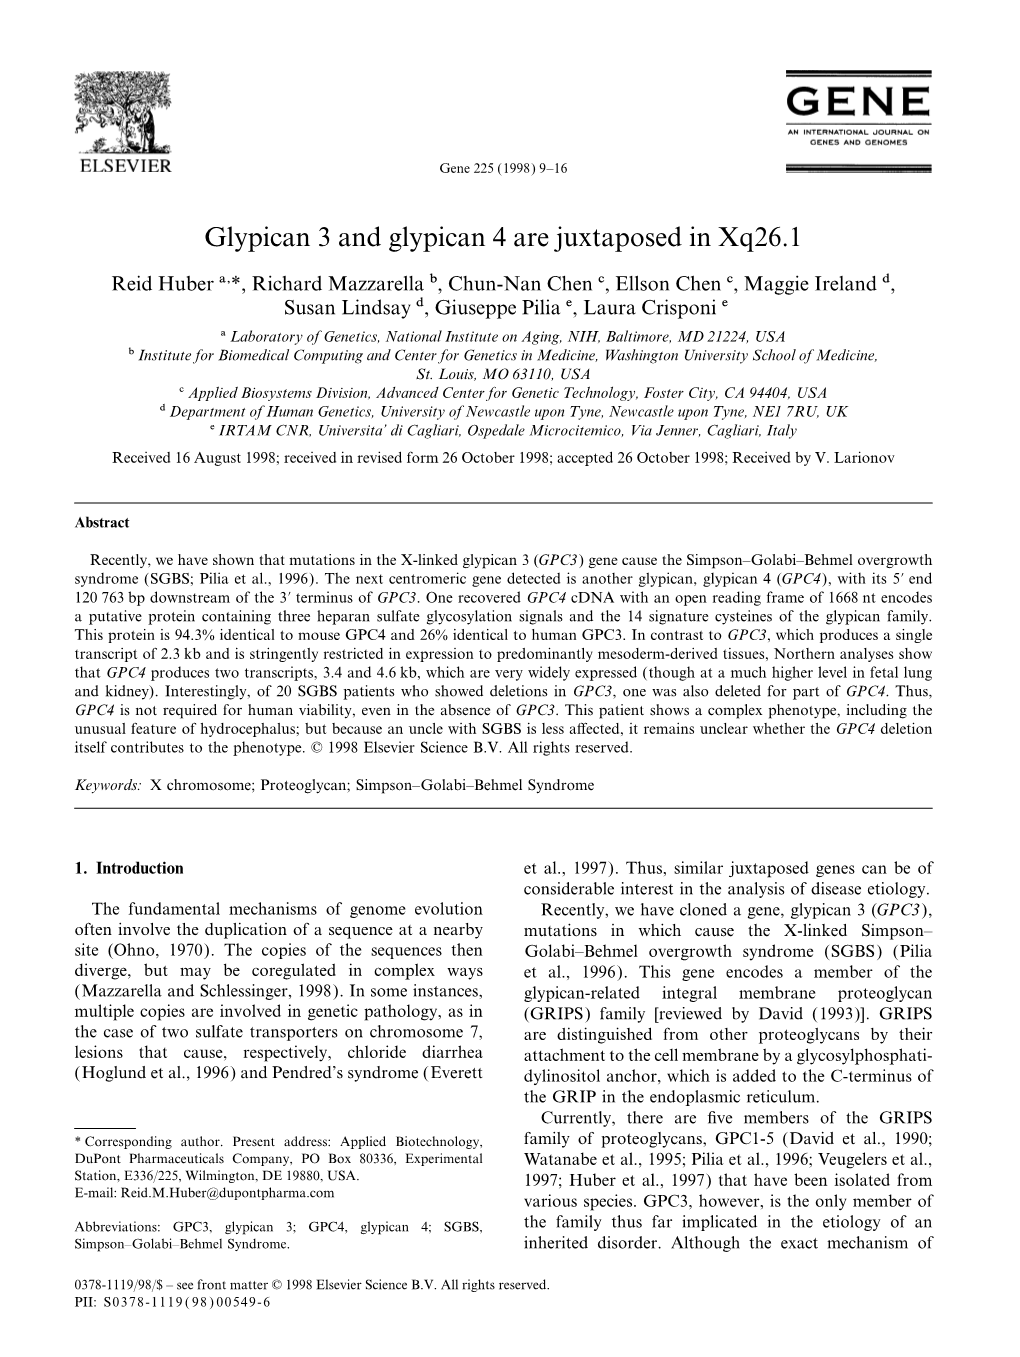 Glypican 3 and Glypican 4 Are Juxtaposed in Xq26.1